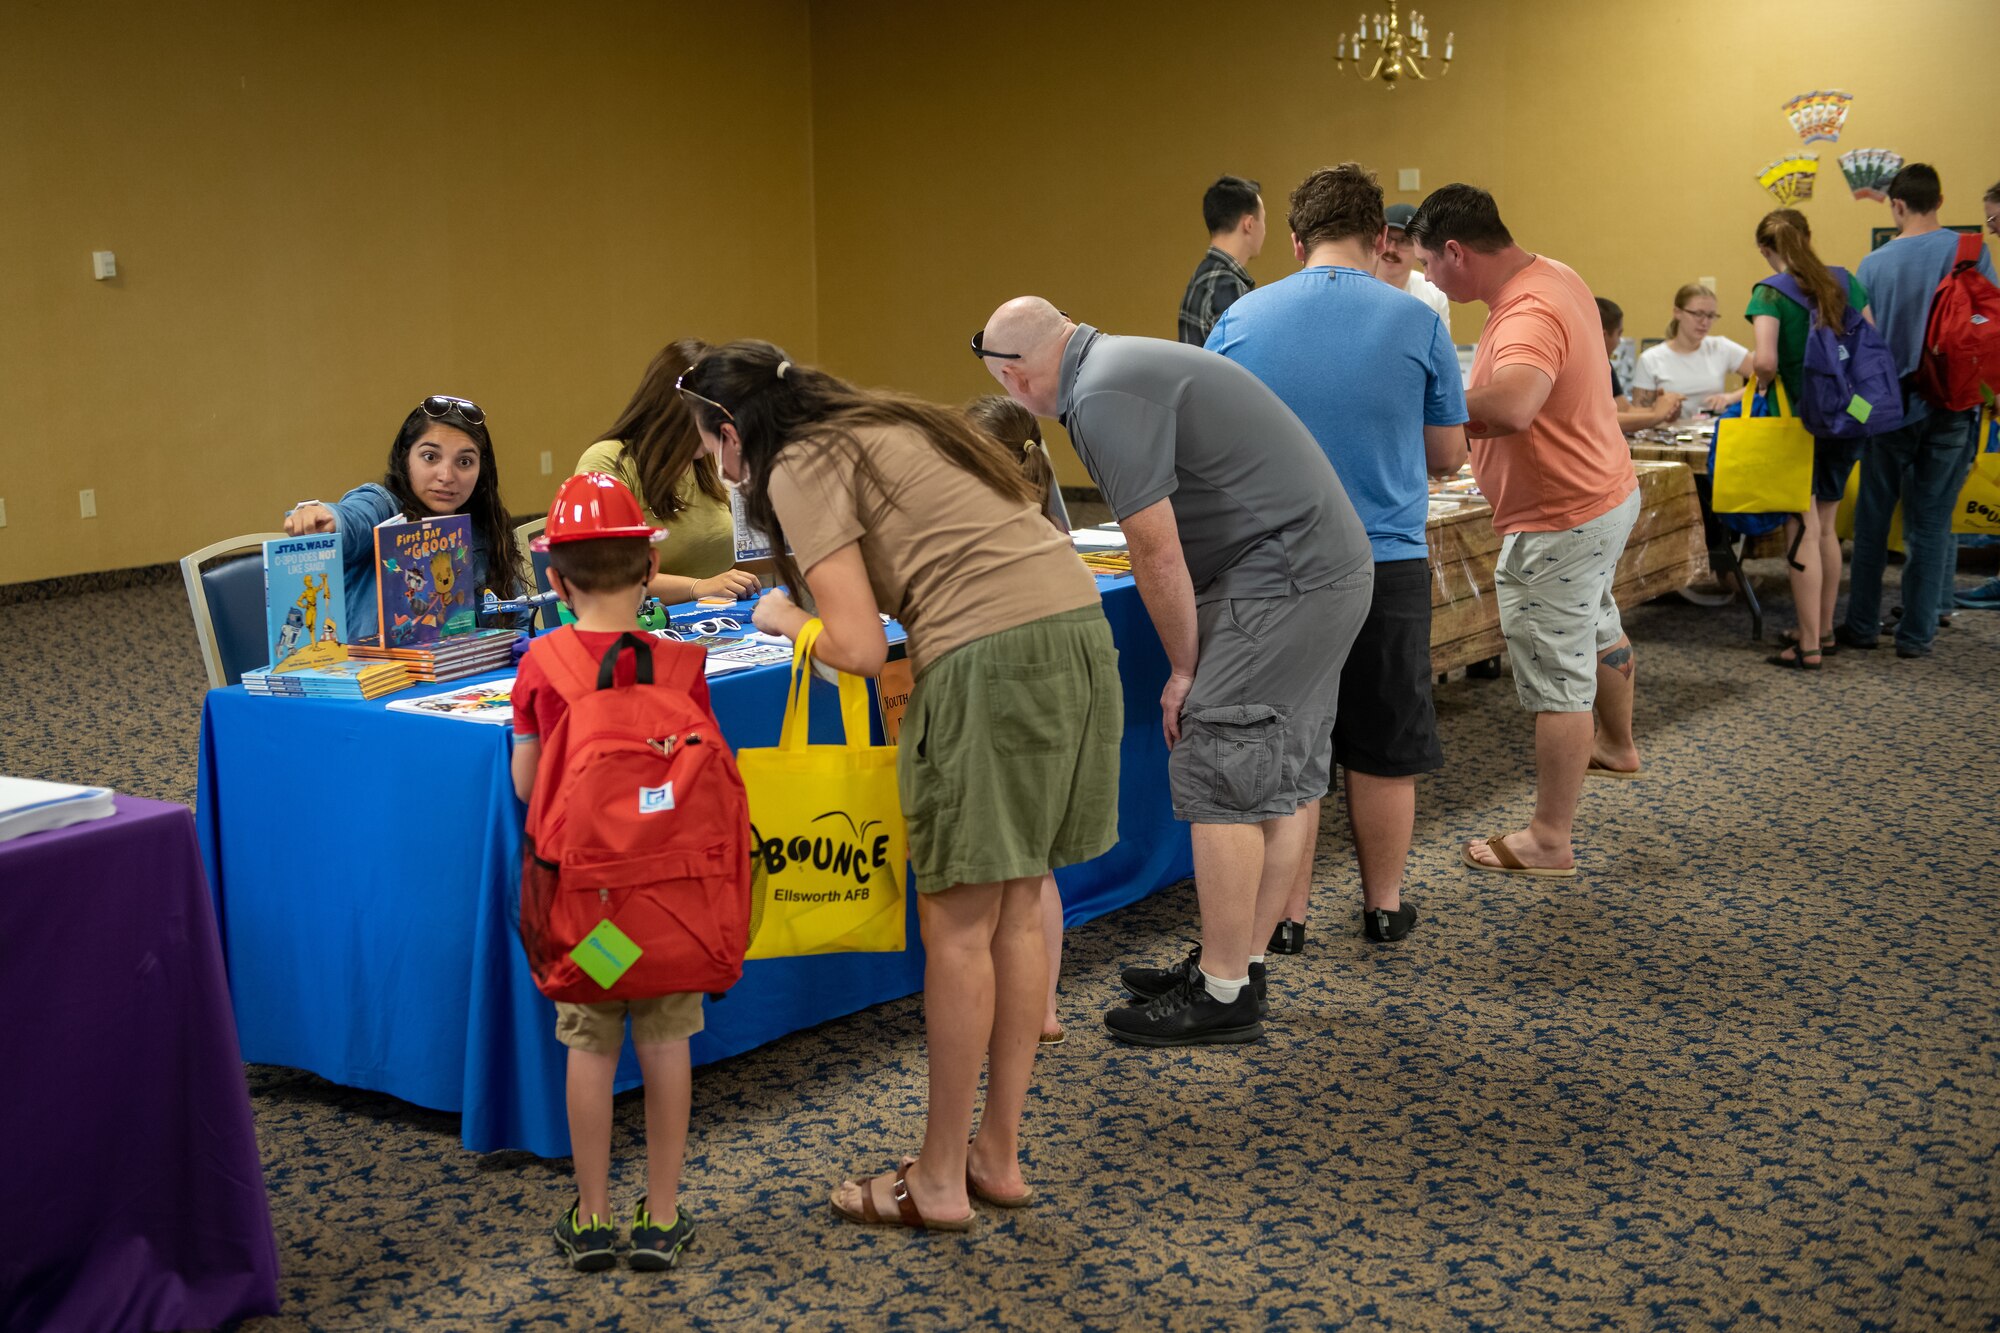 Families examine local educational resource stations at the “Back 2 School Roundup” held at
Ellsworth Air Force Base, S.D., July 30, 2022.